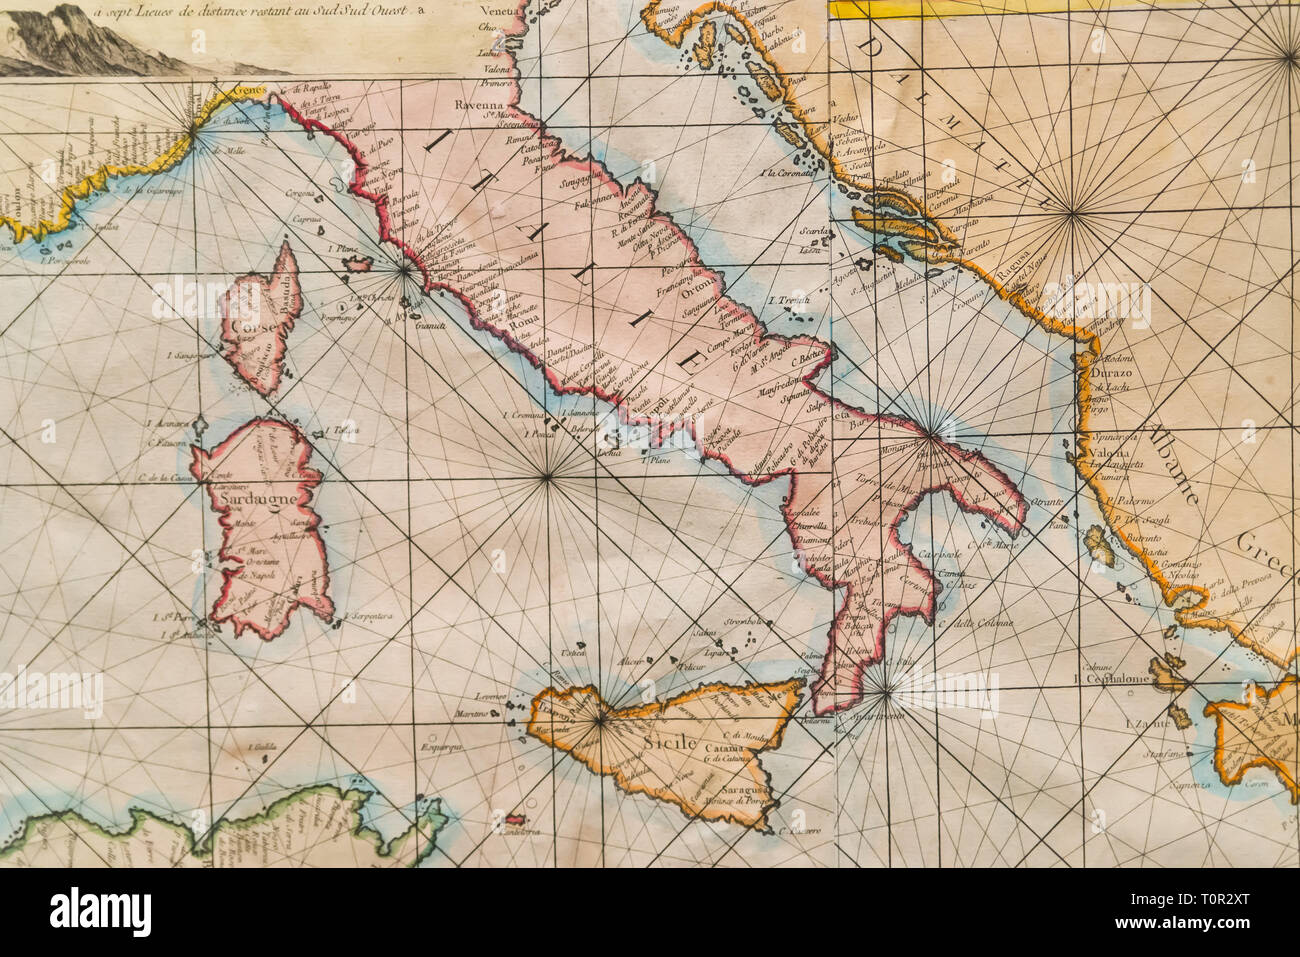 Old naval map of Italy, Sicily, Corsica and Sardinia Stock Photo